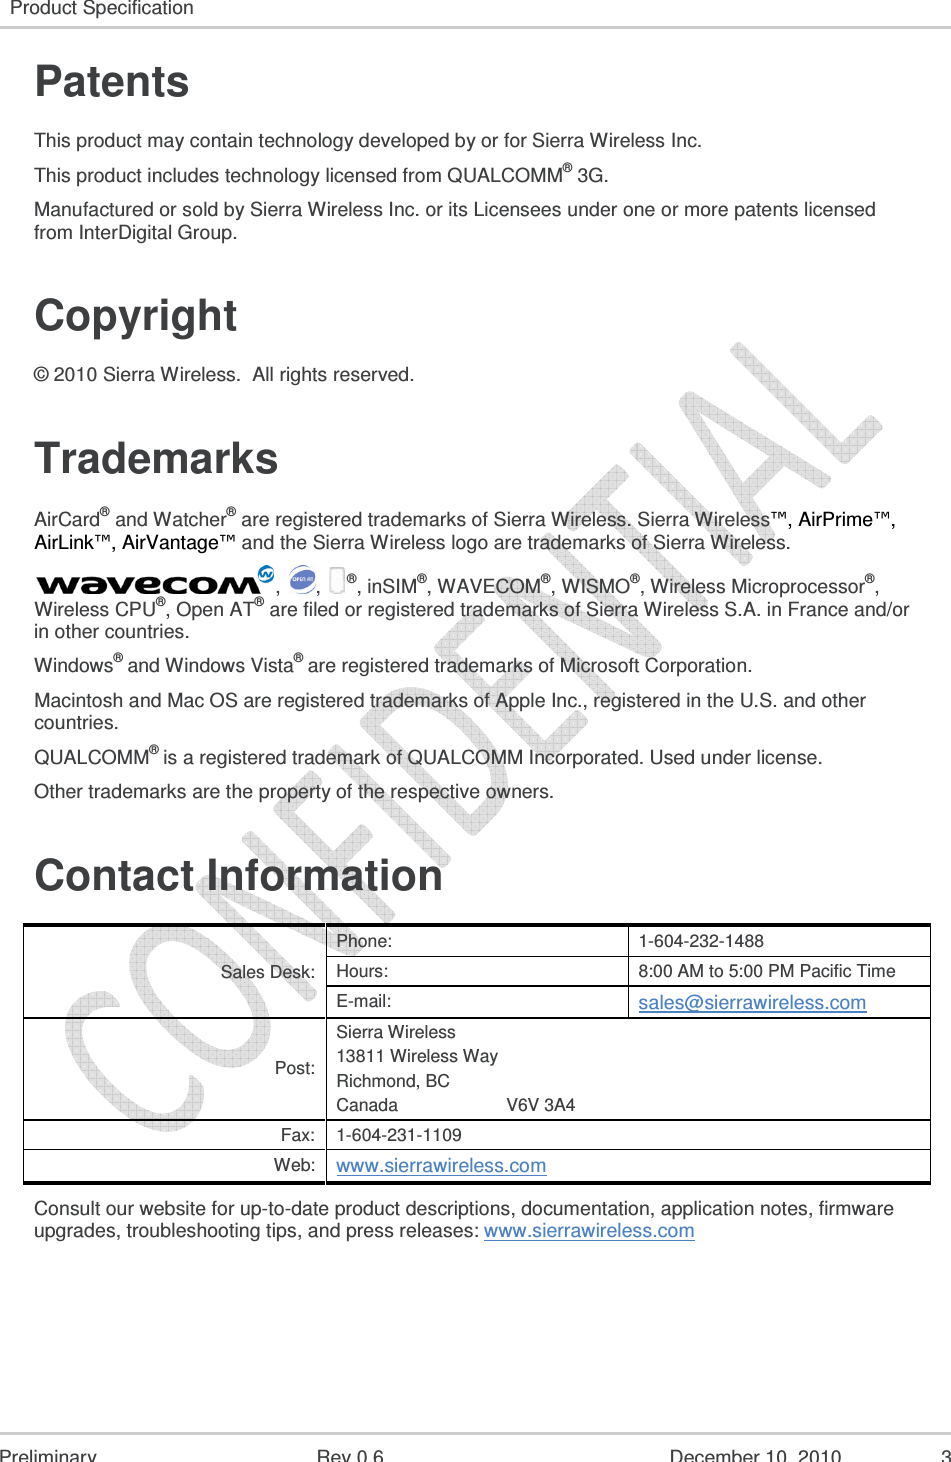   Preliminary Rev 0.6 December 10, 2010 3 Product Specification   Patents This product may contain technology developed by or for Sierra Wireless Inc. This product includes technology licensed from QUALCOMM® 3G. Manufactured or sold by Sierra Wireless Inc. or its Licensees under one or more patents licensed from InterDigital Group. Copyright © 2010 Sierra Wireless.  All rights reserved. Trademarks AirCard® and Watcher® are registered trademarks of Sierra Wireless. Sierra Wireless™, AirPrime™, AirLink™, AirVantage™ and the Sierra Wireless logo are trademarks of Sierra Wireless. ,  , ®, inSIM®, WAVECOM®, WISMO®, Wireless Microprocessor®, Wireless CPU®, Open AT® are filed or registered trademarks of Sierra Wireless S.A. in France and/or in other countries. Windows® and Windows Vista® are registered trademarks of Microsoft Corporation. Macintosh and Mac OS are registered trademarks of Apple Inc., registered in the U.S. and other countries. QUALCOMM® is a registered trademark of QUALCOMM Incorporated. Used under license. Other trademarks are the property of the respective owners. Contact Information Sales Desk: Phone:  1-604-232-1488 Hours:  8:00 AM to 5:00 PM Pacific Time E-mail: sales@sierrawireless.com Post: Sierra Wireless 13811 Wireless Way Richmond, BC Canada                      V6V 3A4 Fax:  1-604-231-1109 Web: www.sierrawireless.com Consult our website for up-to-date product descriptions, documentation, application notes, firmware upgrades, troubleshooting tips, and press releases: www.sierrawireless.com   